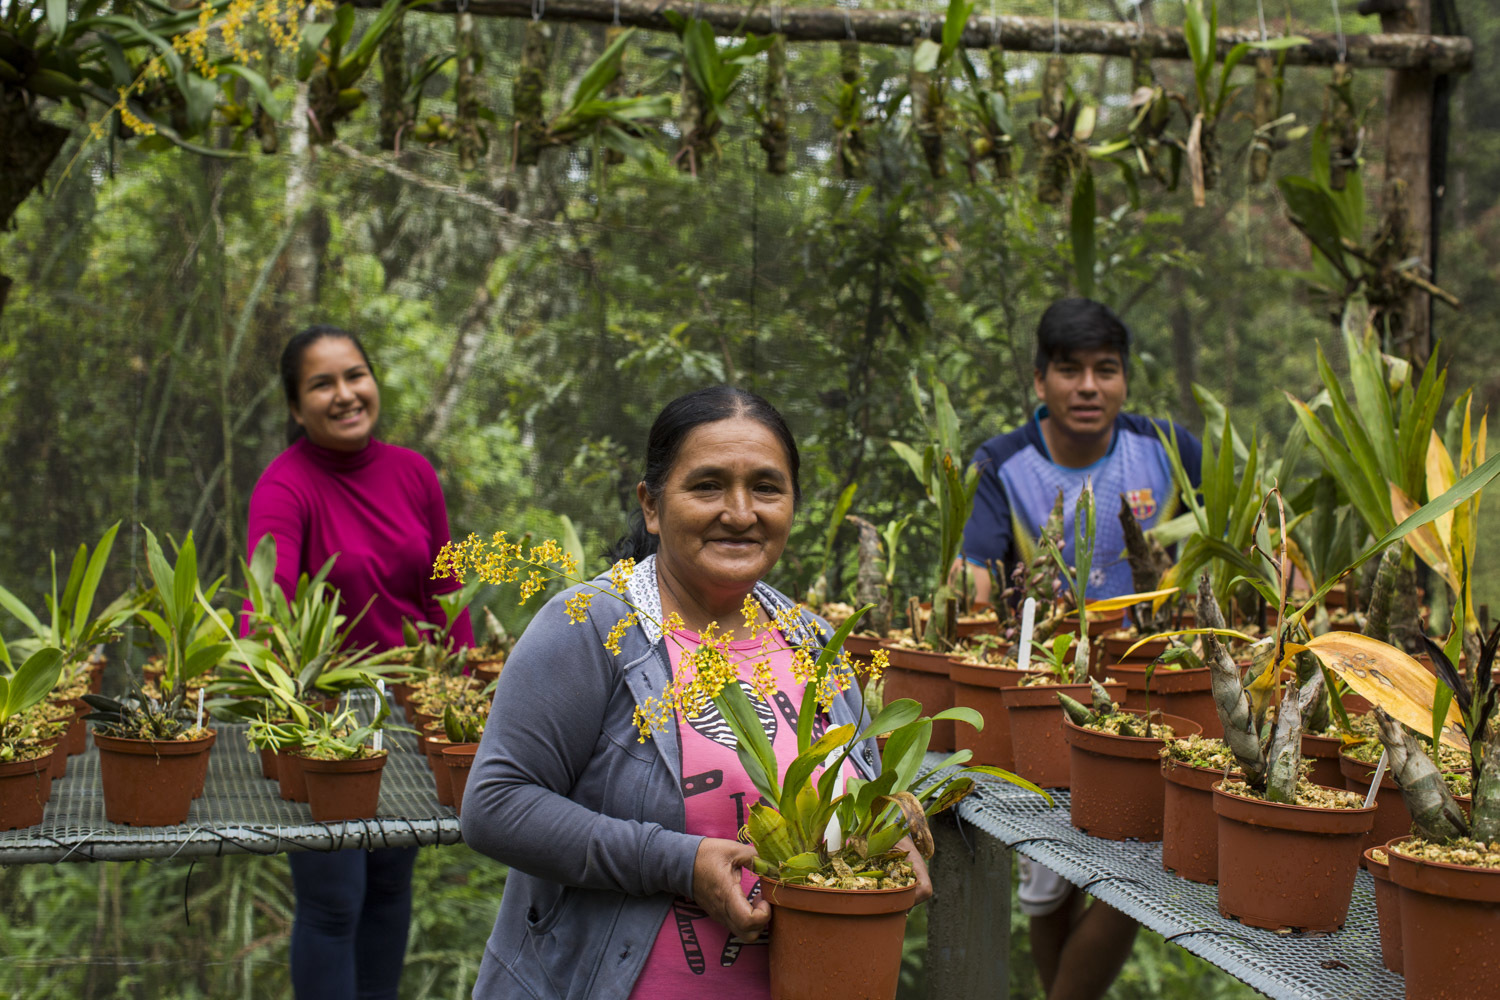 A smiling older woman holds a potted plan in her hand as two young people smile behind rows of potted plants behind her.